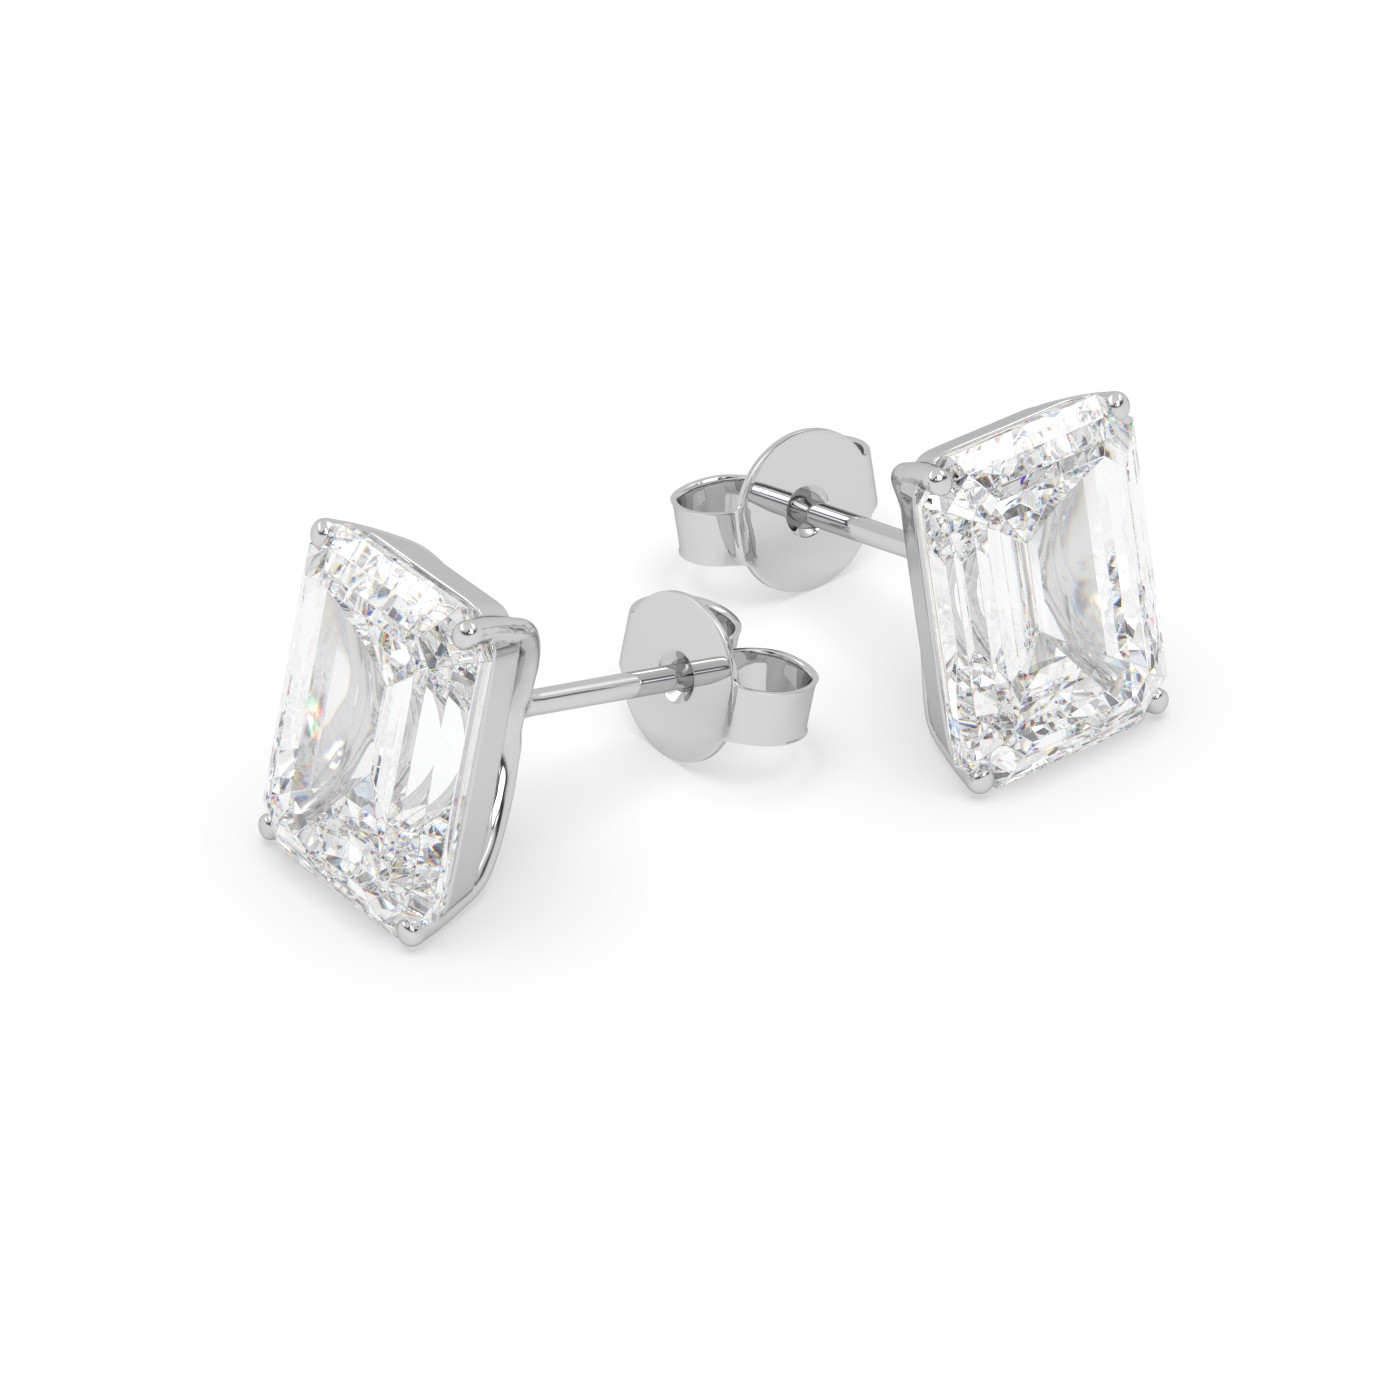 18K WHITE GOLD Emerald Stud Earrings with butterfly back